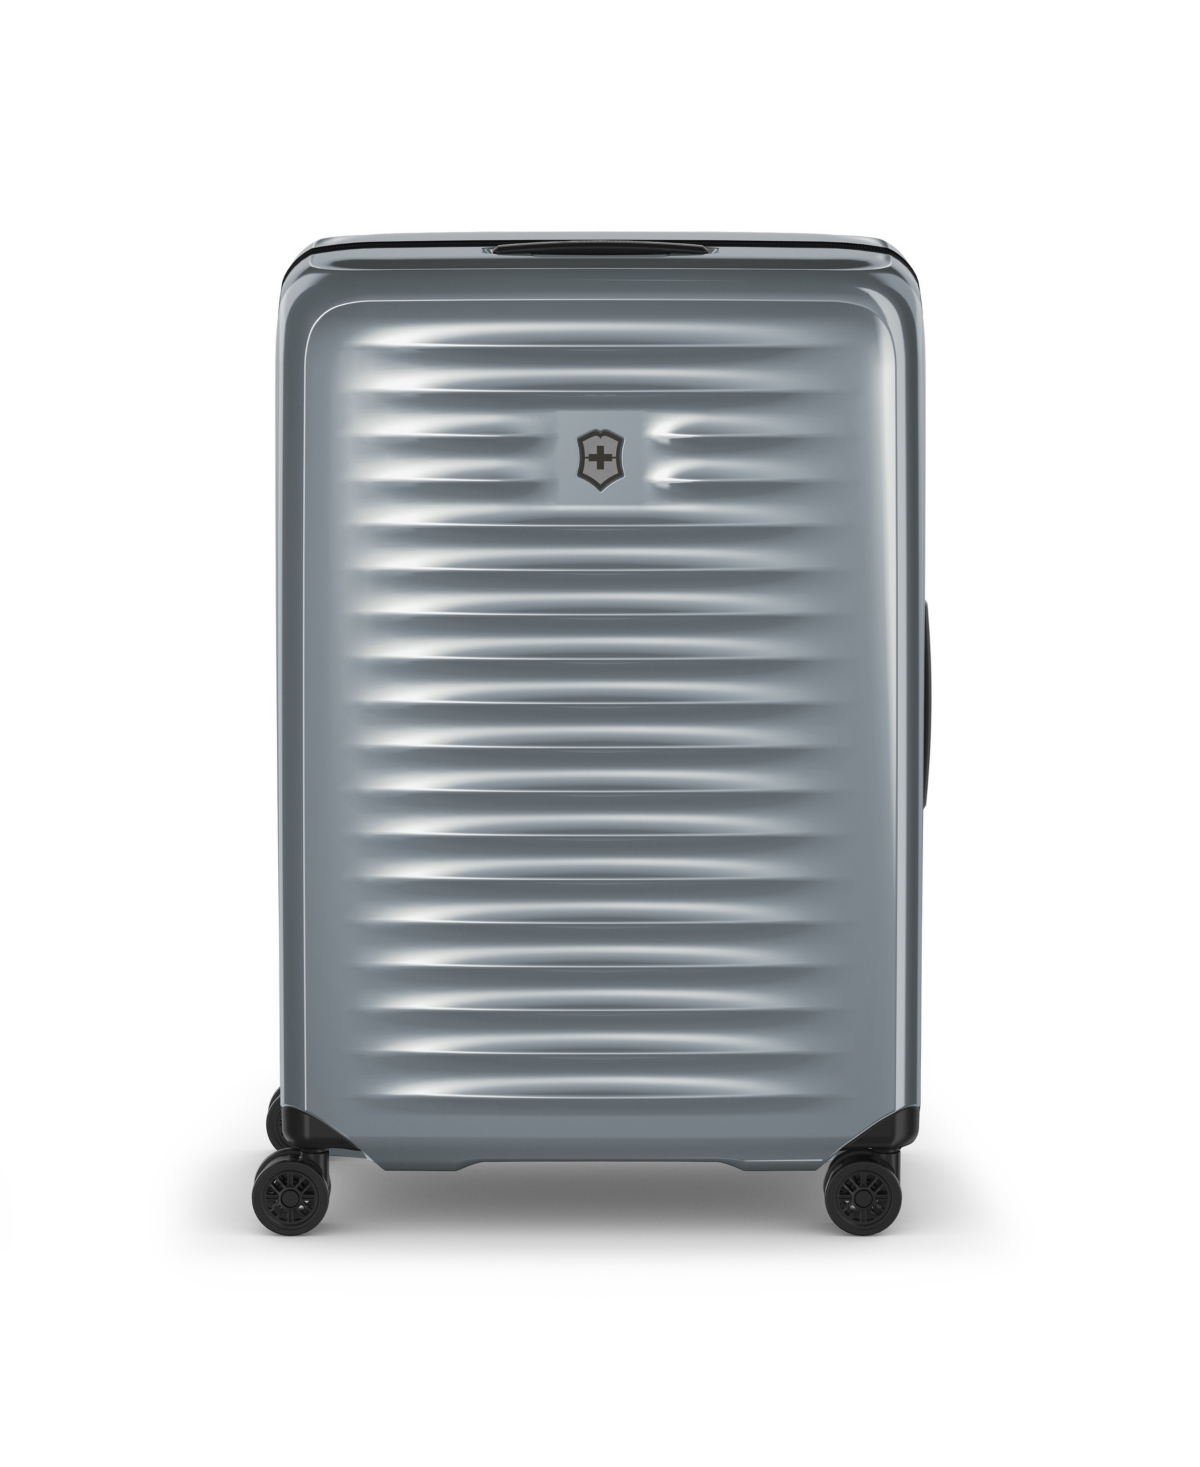 Airox Large 27" Check-in Hardside Suitcase - Silver-Tone